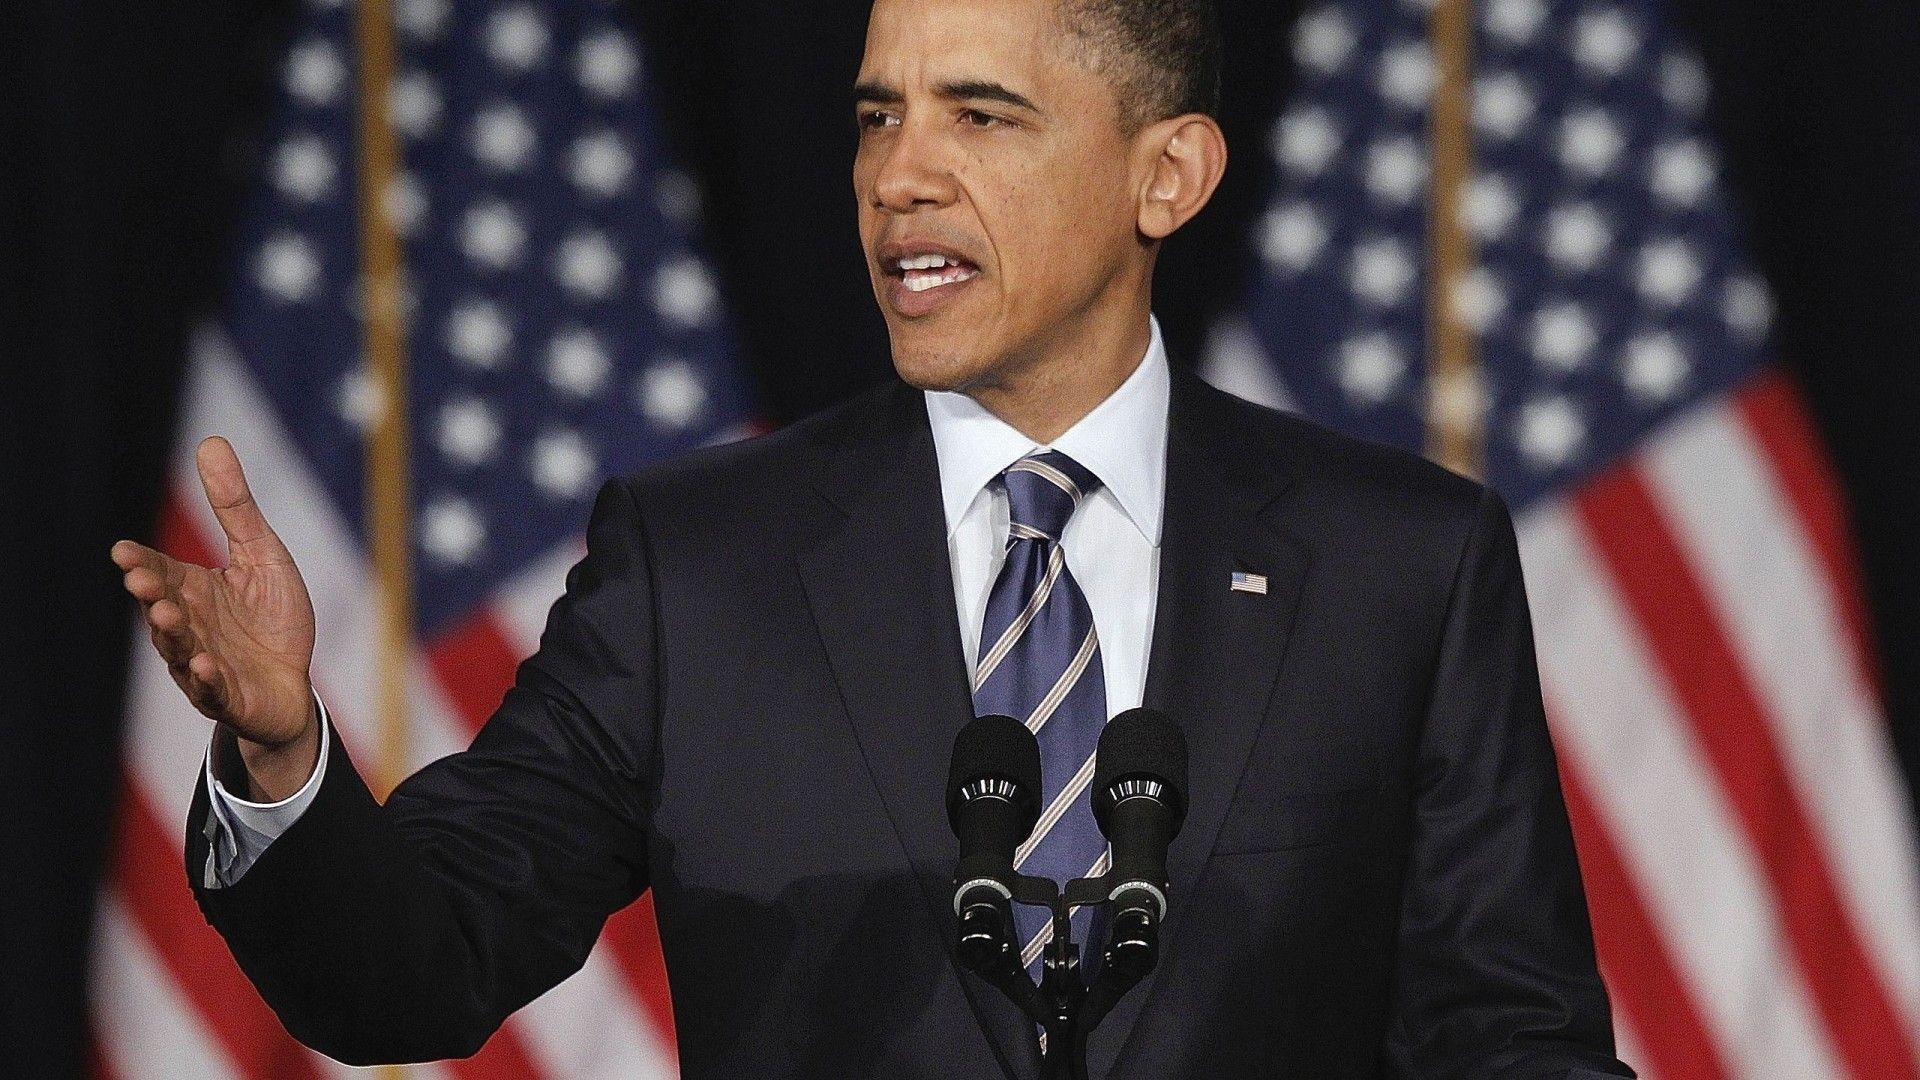 President Obama Wallpaper background picture